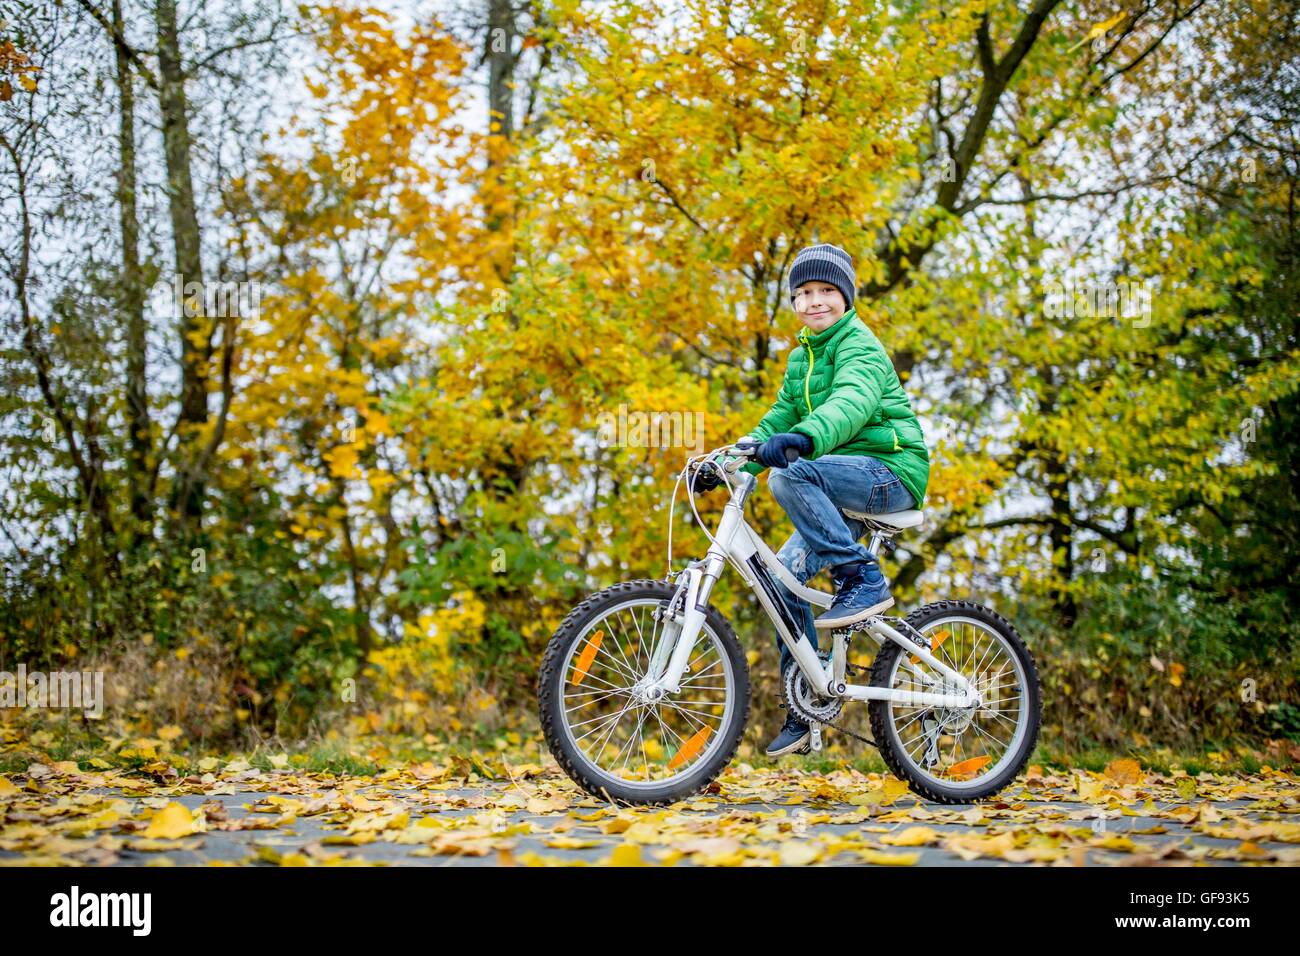 MODEL RELEASED. Portrait of boy cycling in autumn. Stock Photo